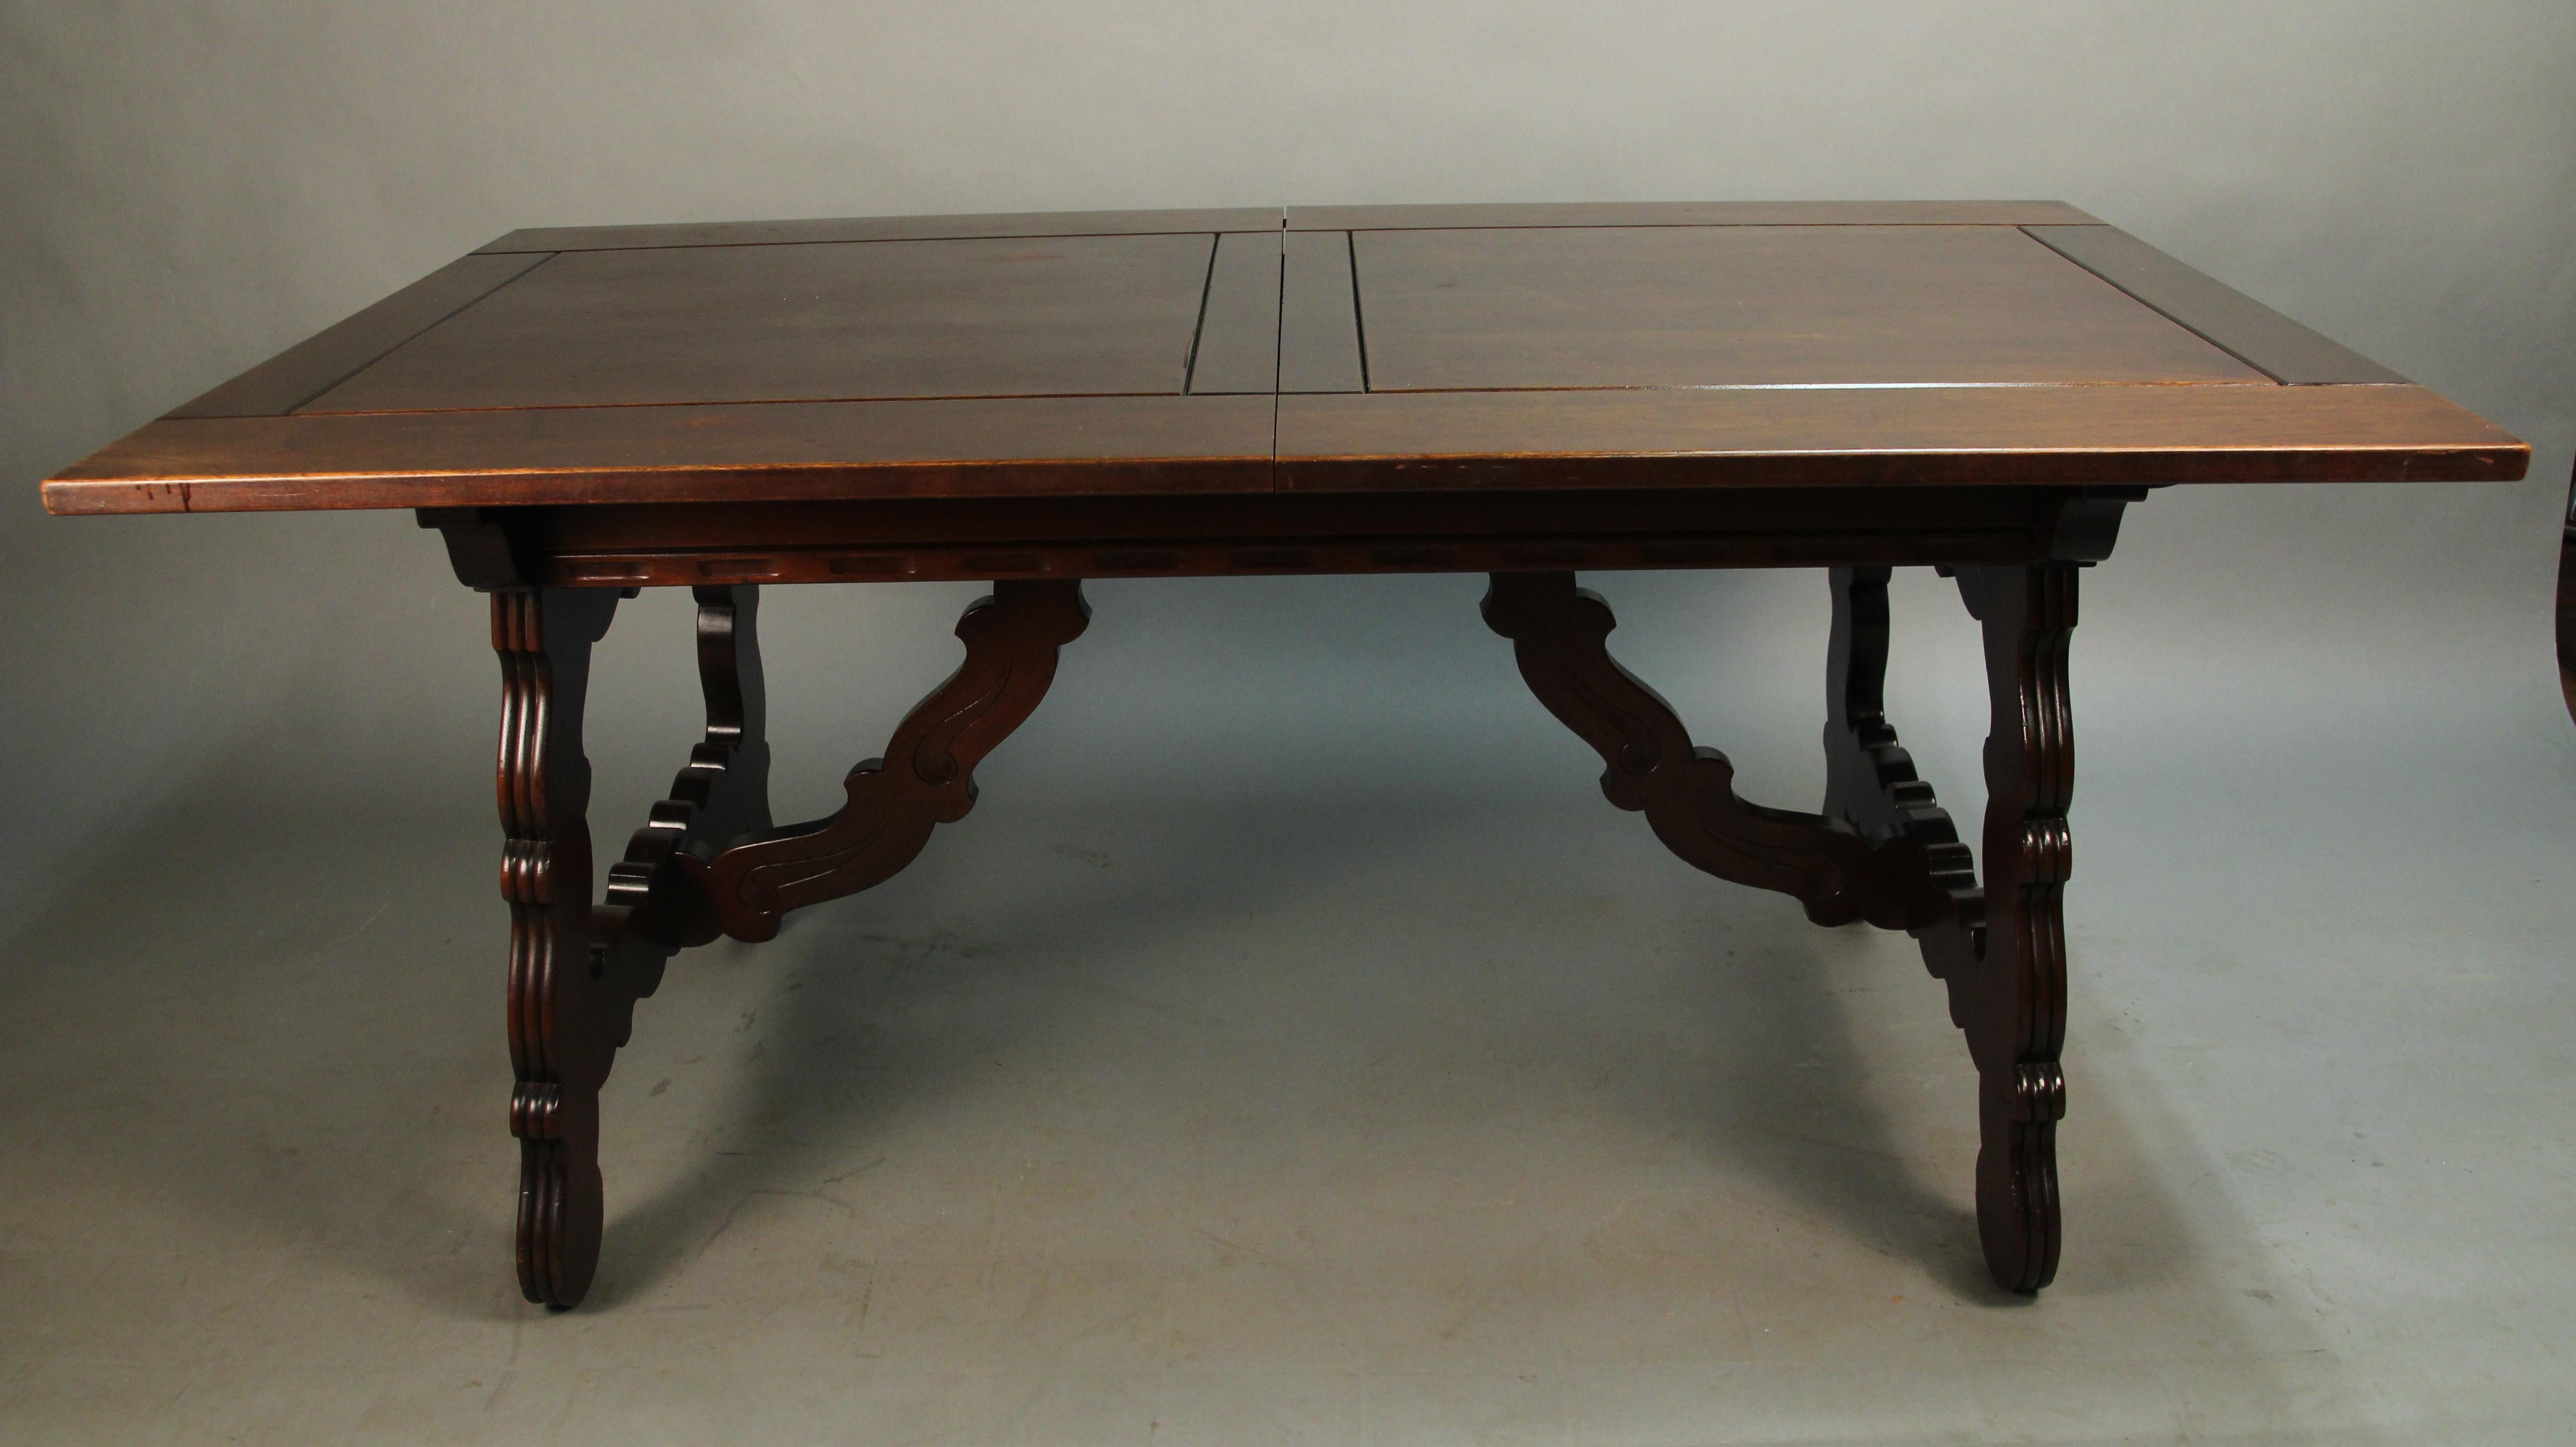 Walnut dining room table with 4 leafs, circa 1920s. With leafs the table can open to 102